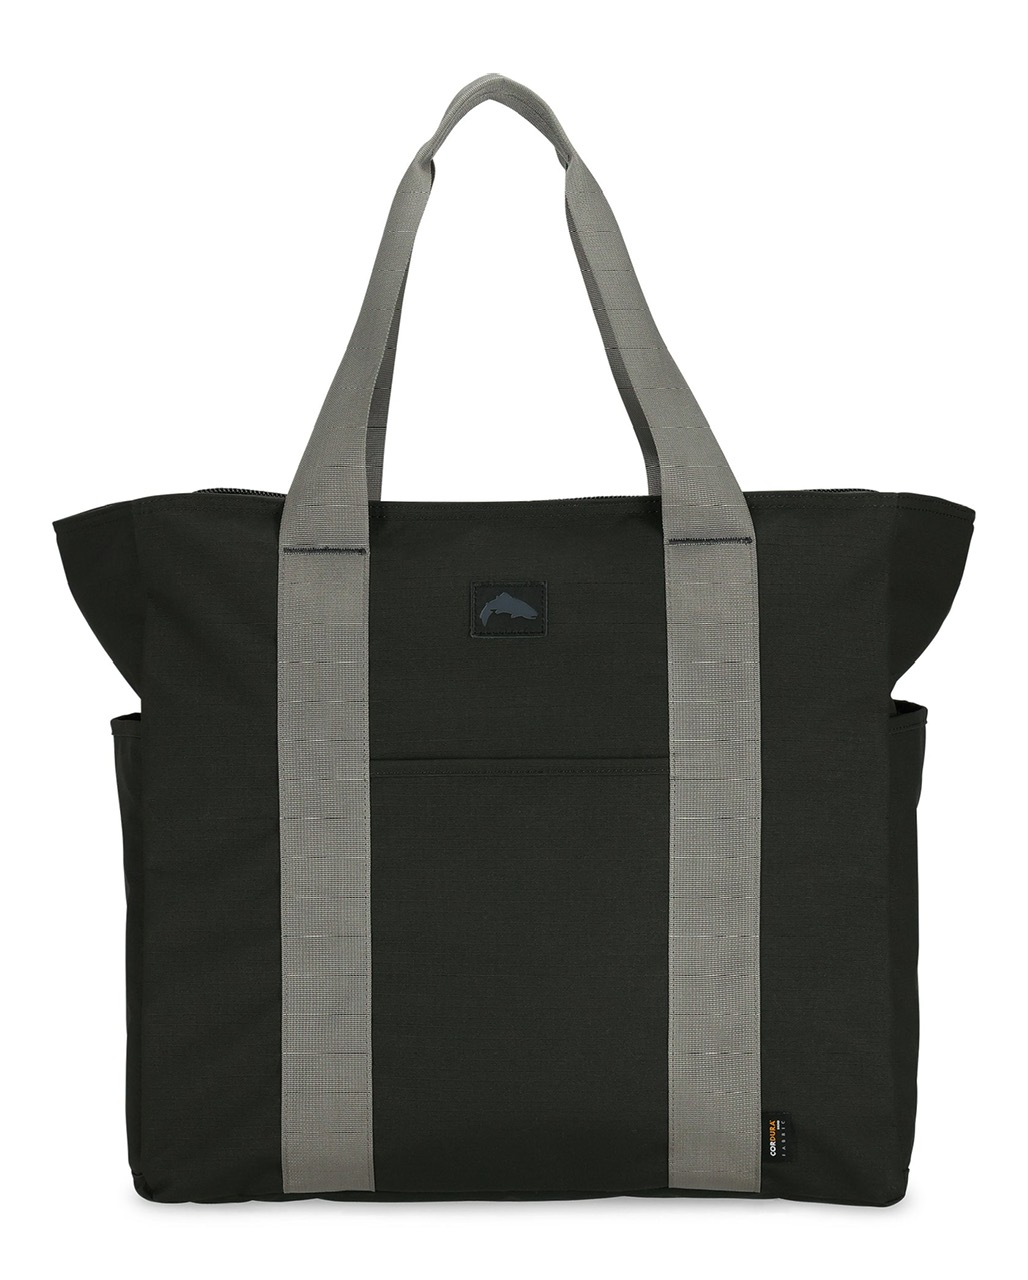 Simms GTS Travel Tote - Carbon